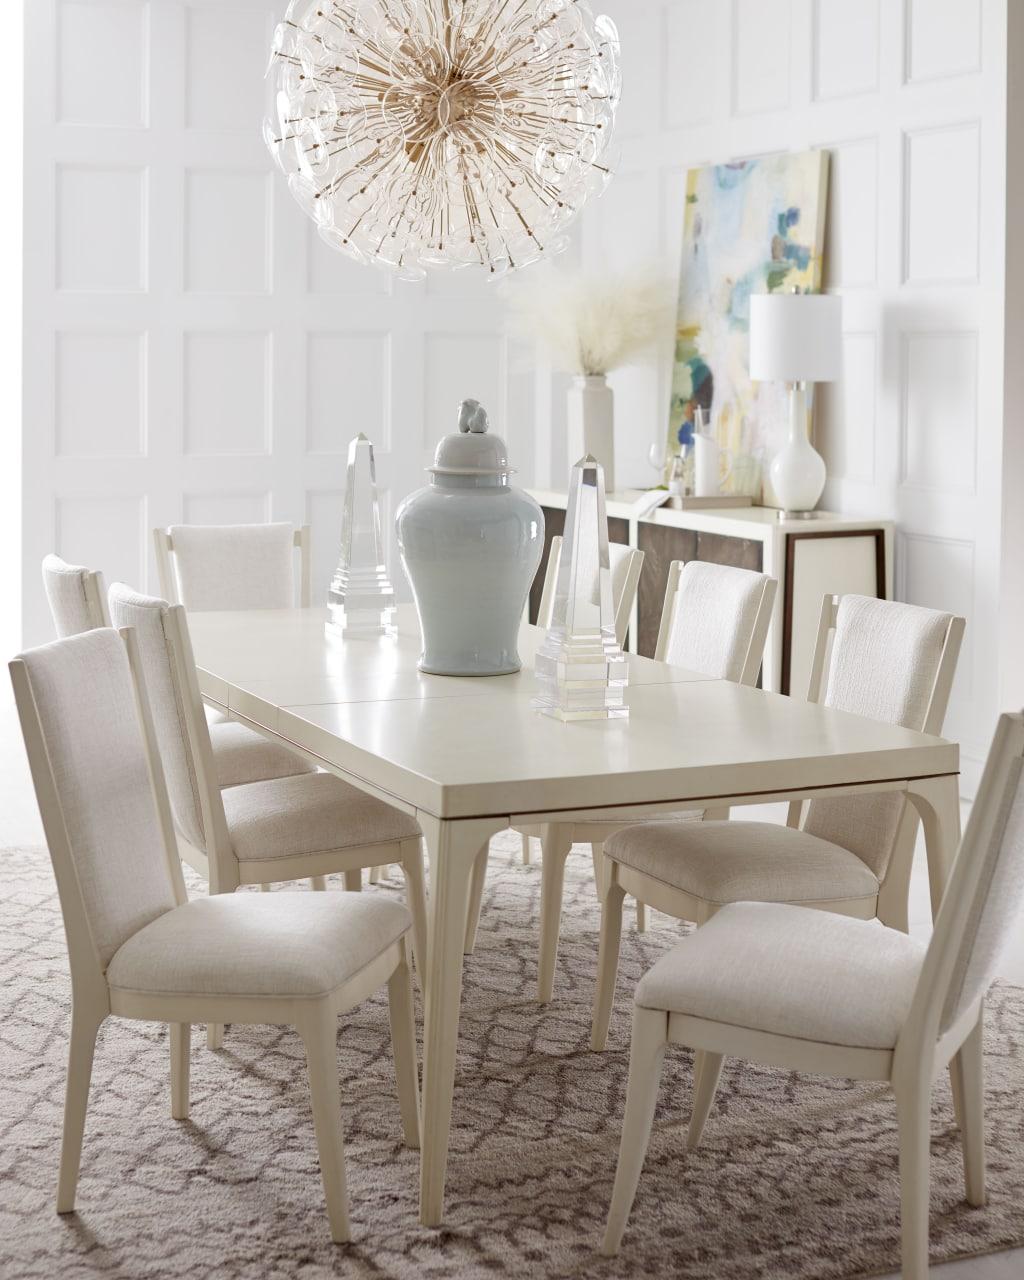 Modern, Casual Dining Table Set Blanc 289220-1040-7pcs in Beige Fabric